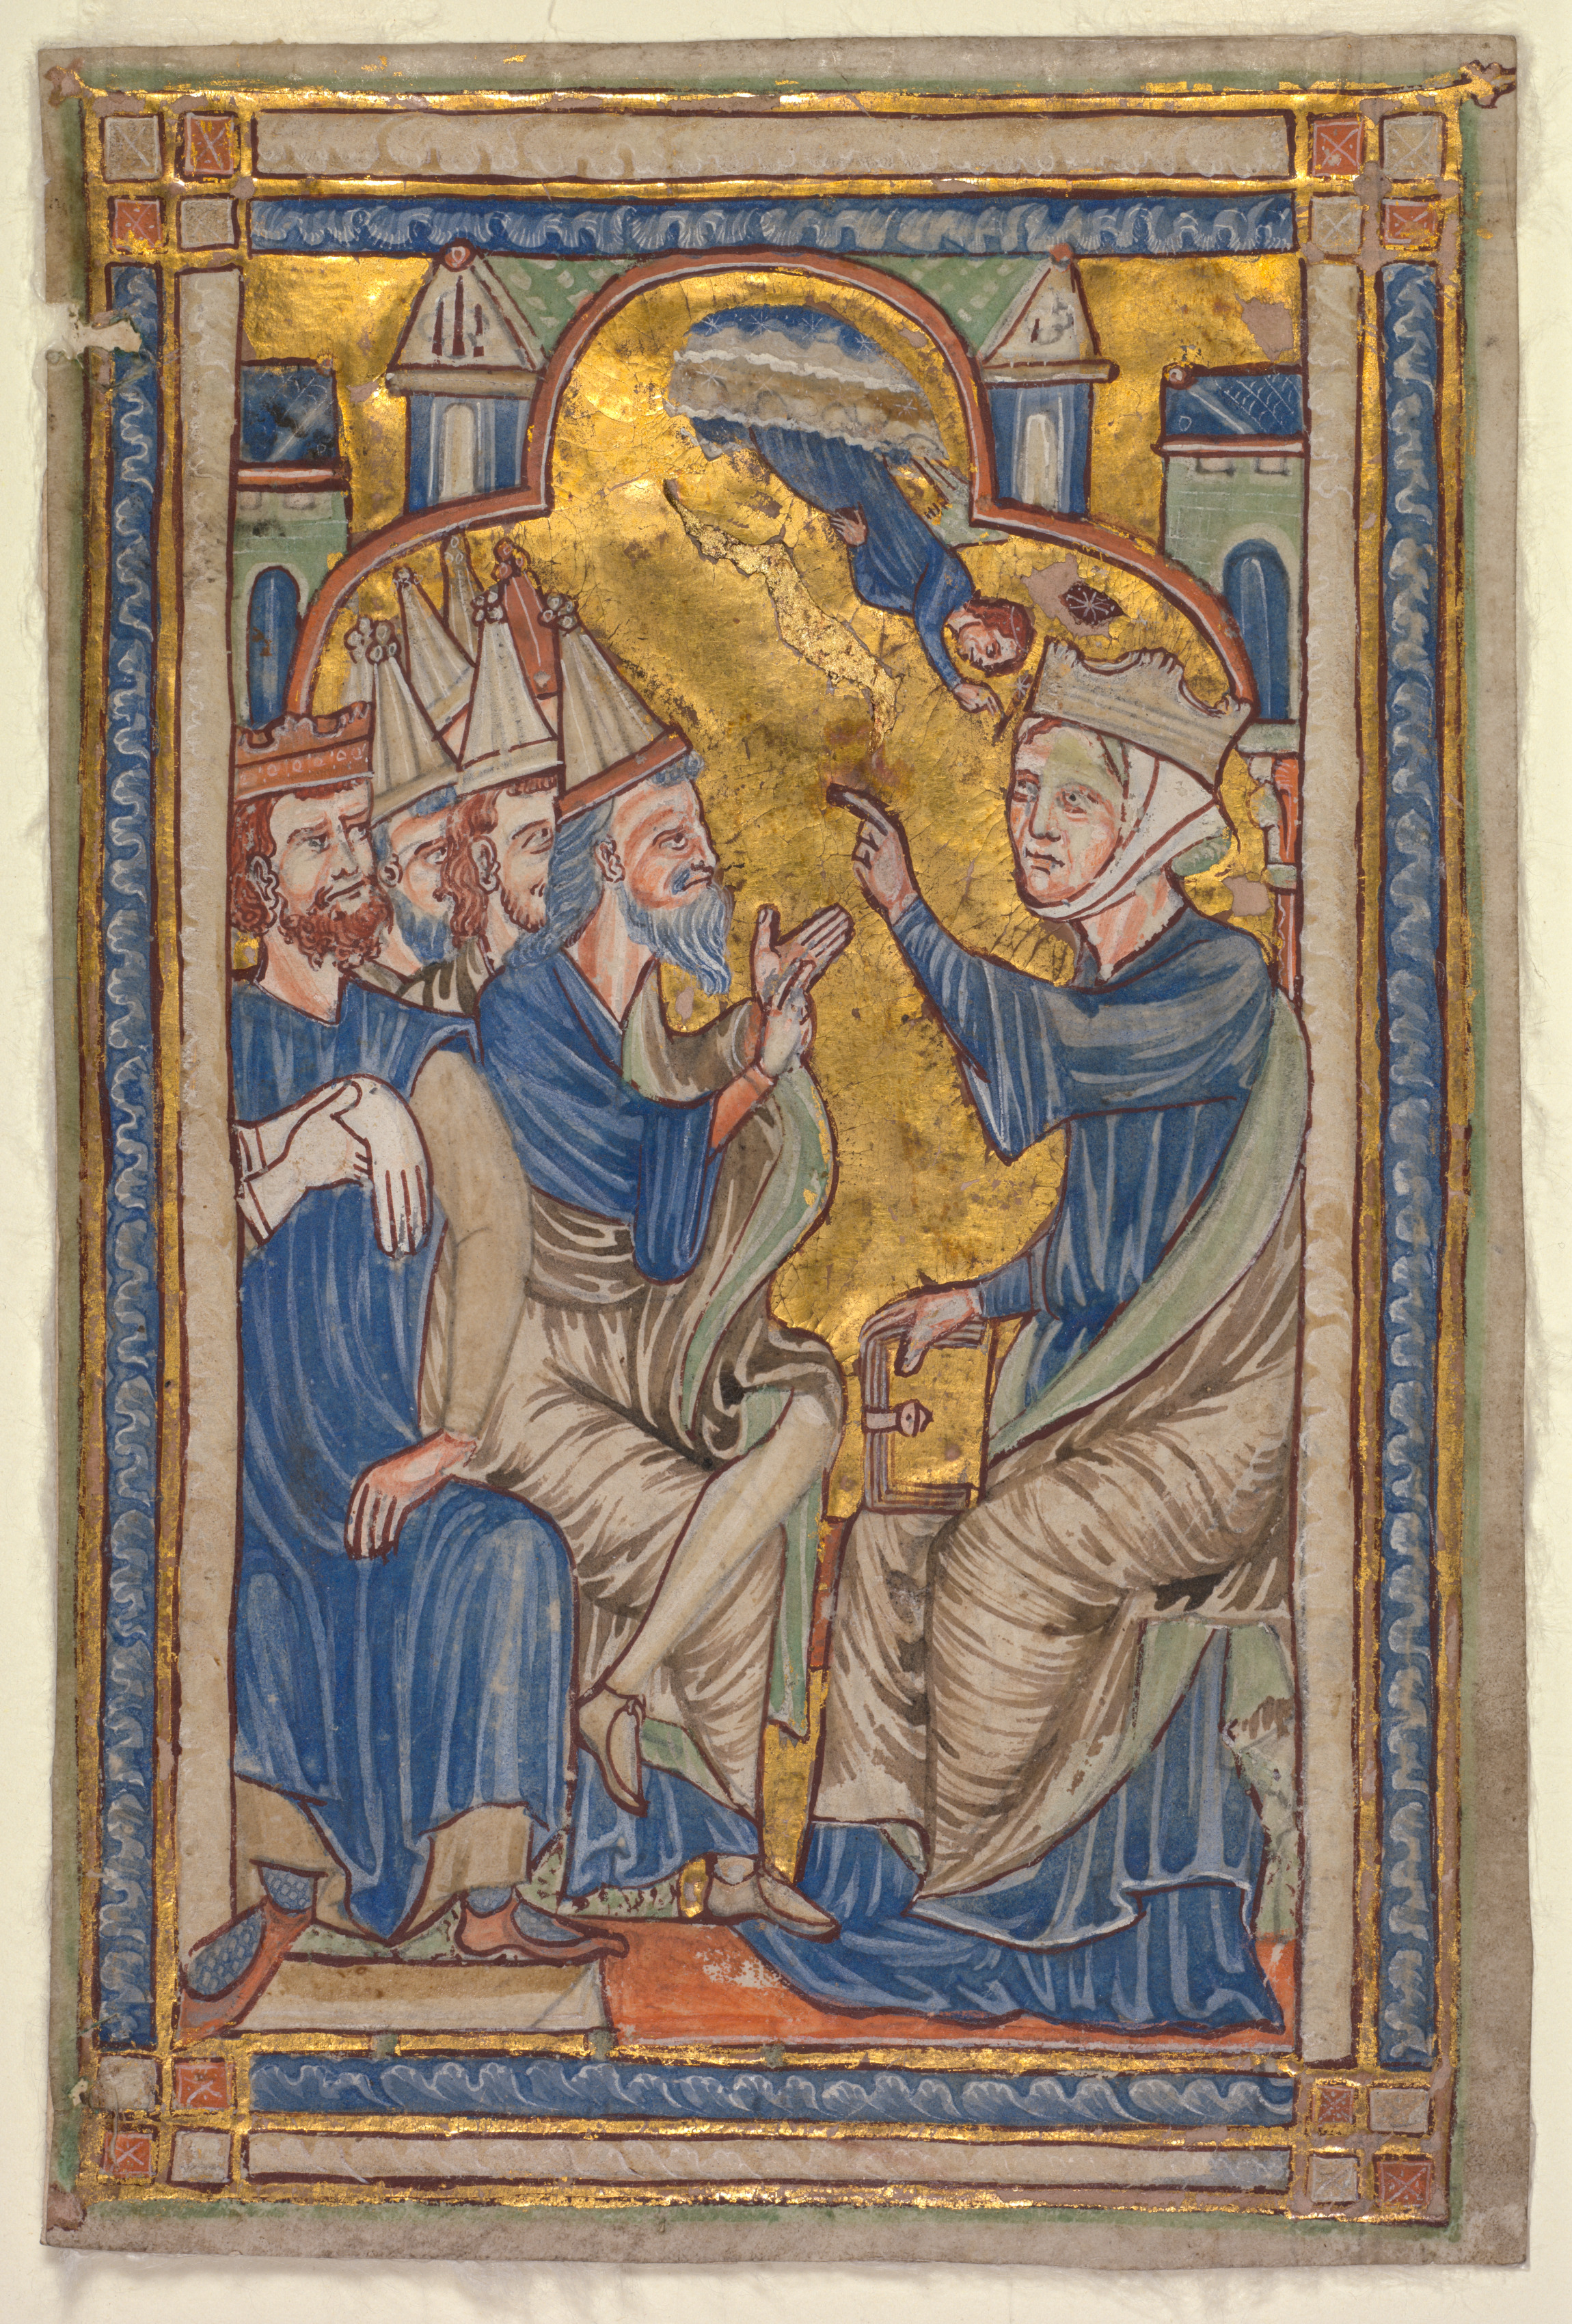 Miniature from a Compendium of Saints' Lives: Saint Catherine of Alexandria Disputing with the Fifty Philosophers